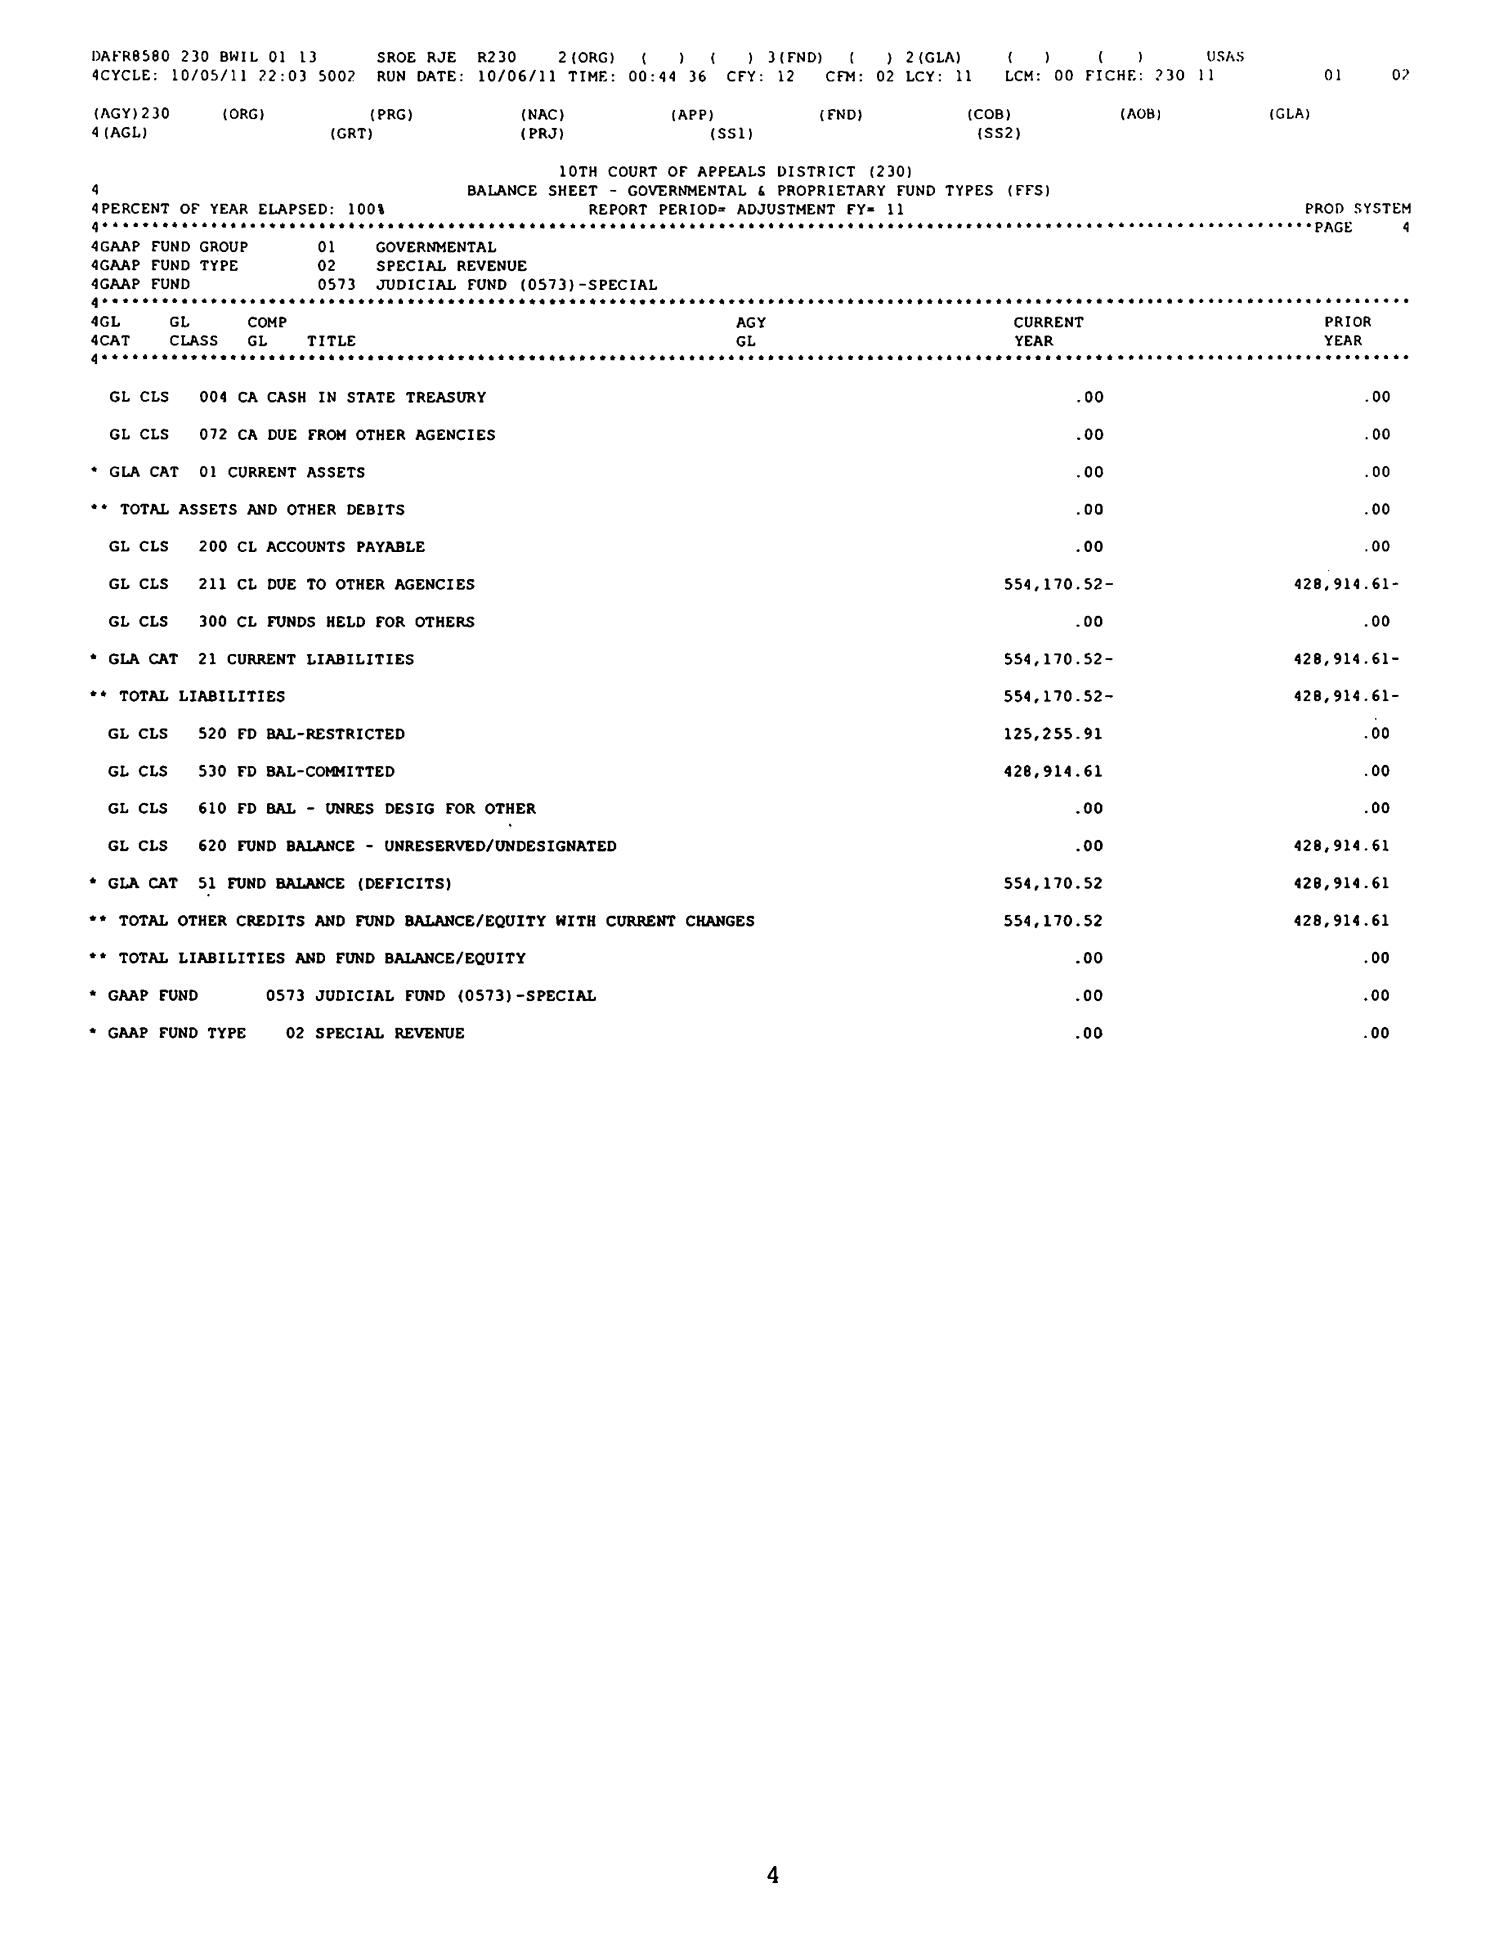 Texas Tenth Court of Appeals Annual Financial Report: 2011
                                                
                                                    4
                                                